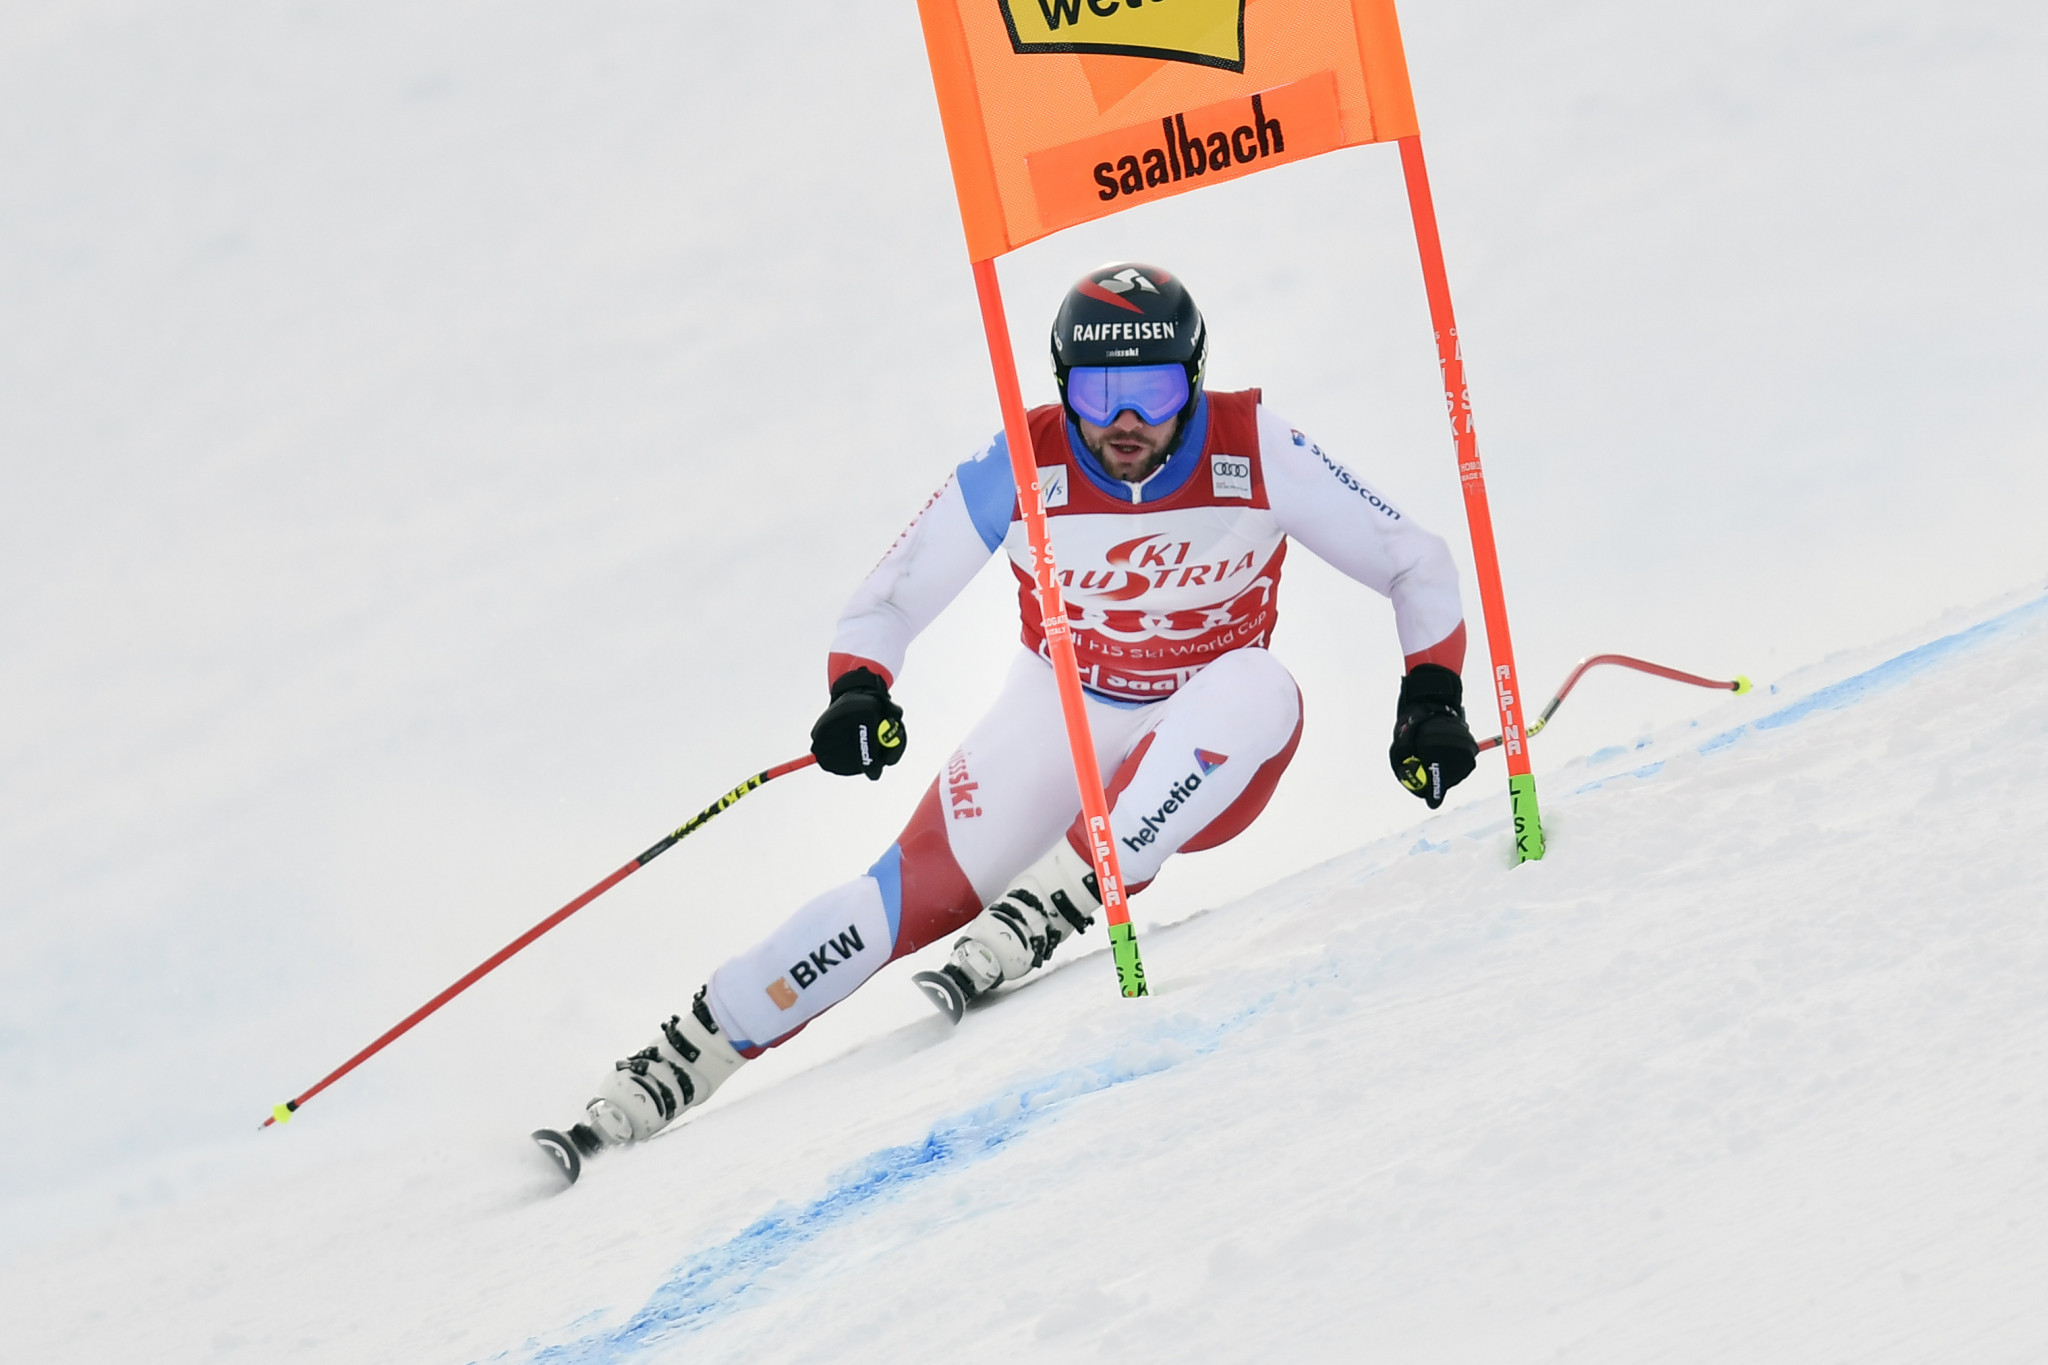 Switzerland's Beat Feuz, the leader of the FIS Alpine Ski World Cup standings for men's downhill, ranked 17th in training in Saalbach-Hinterglemm ©Getty Images